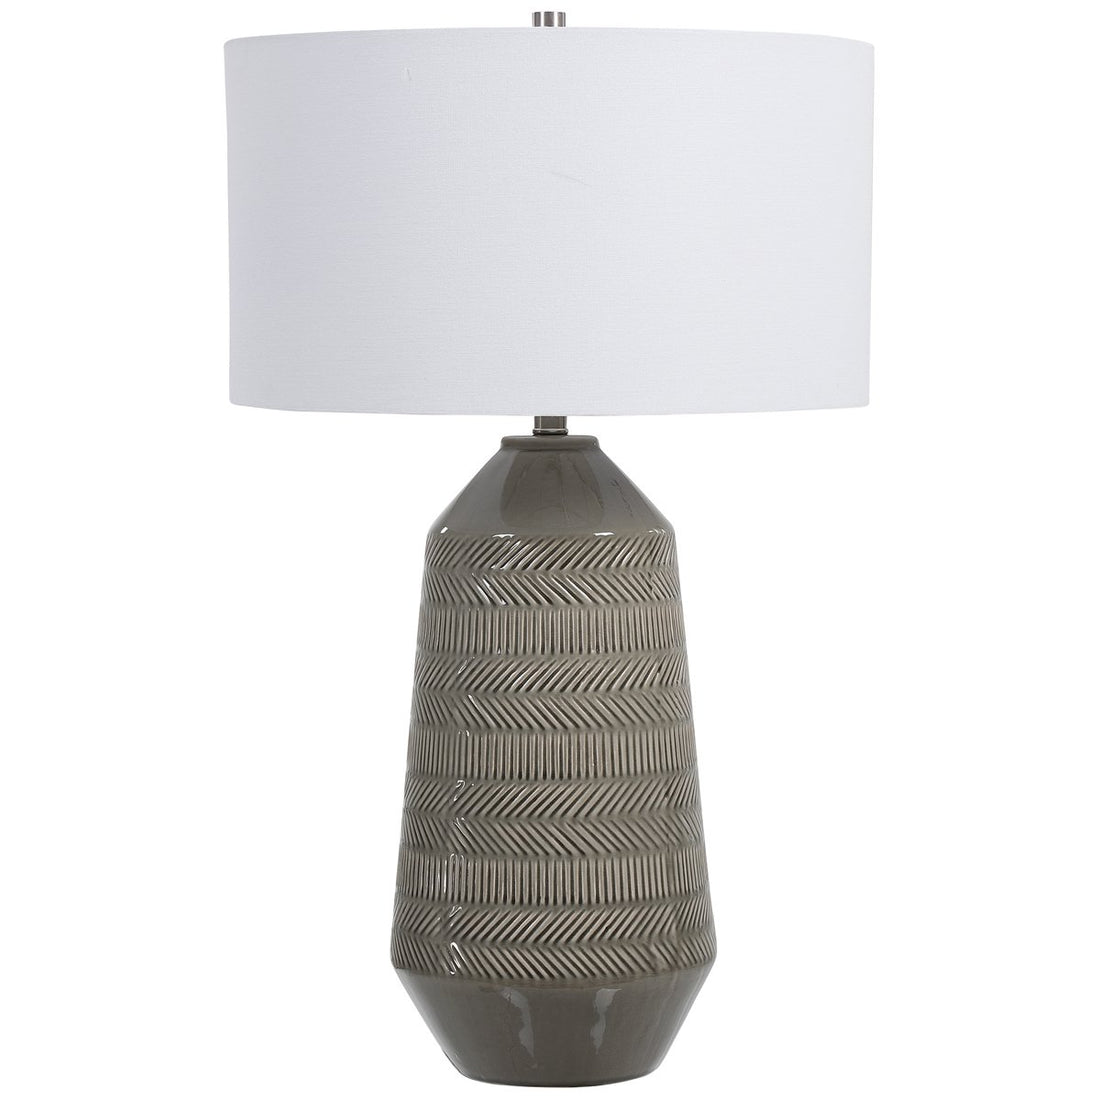 Uttermost Rewind Gray Table Lamp